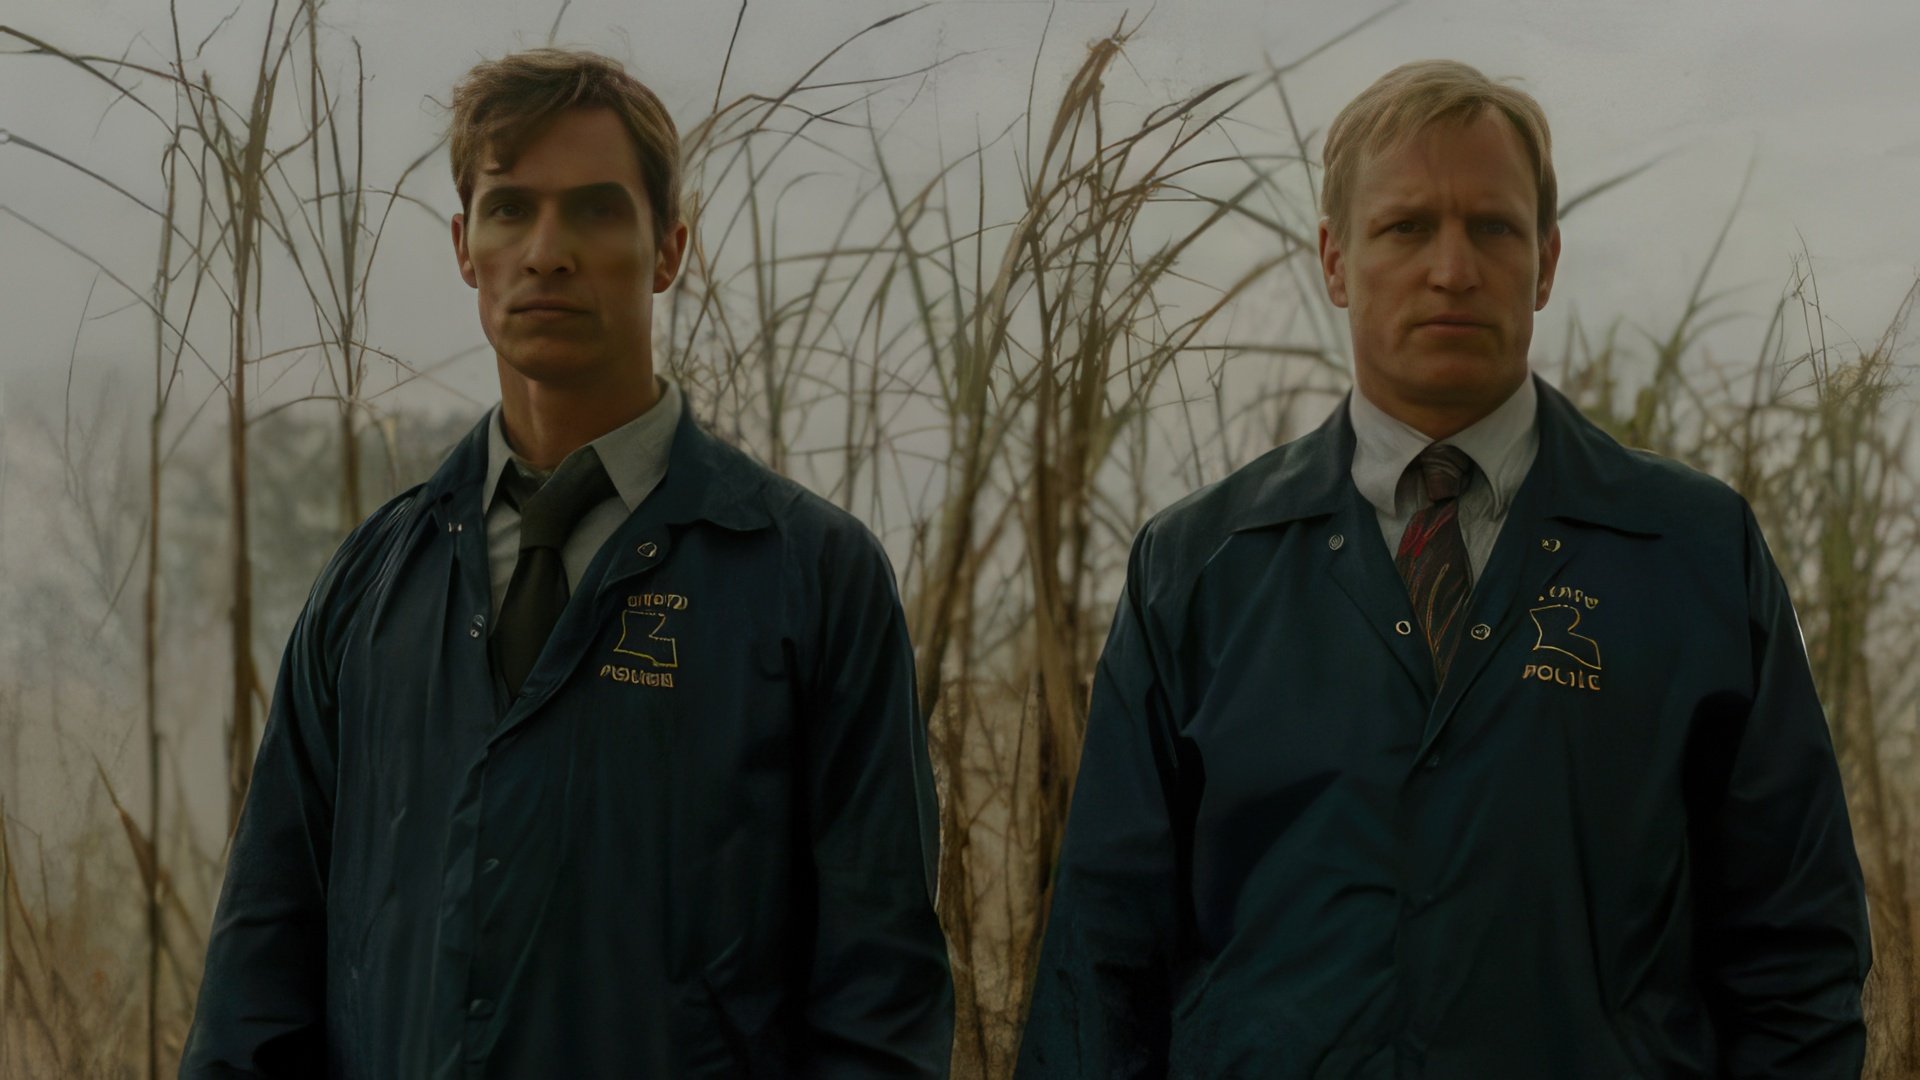 Matthew McConaughey and Woody Harrelson played together in the TV series 'True Detective'